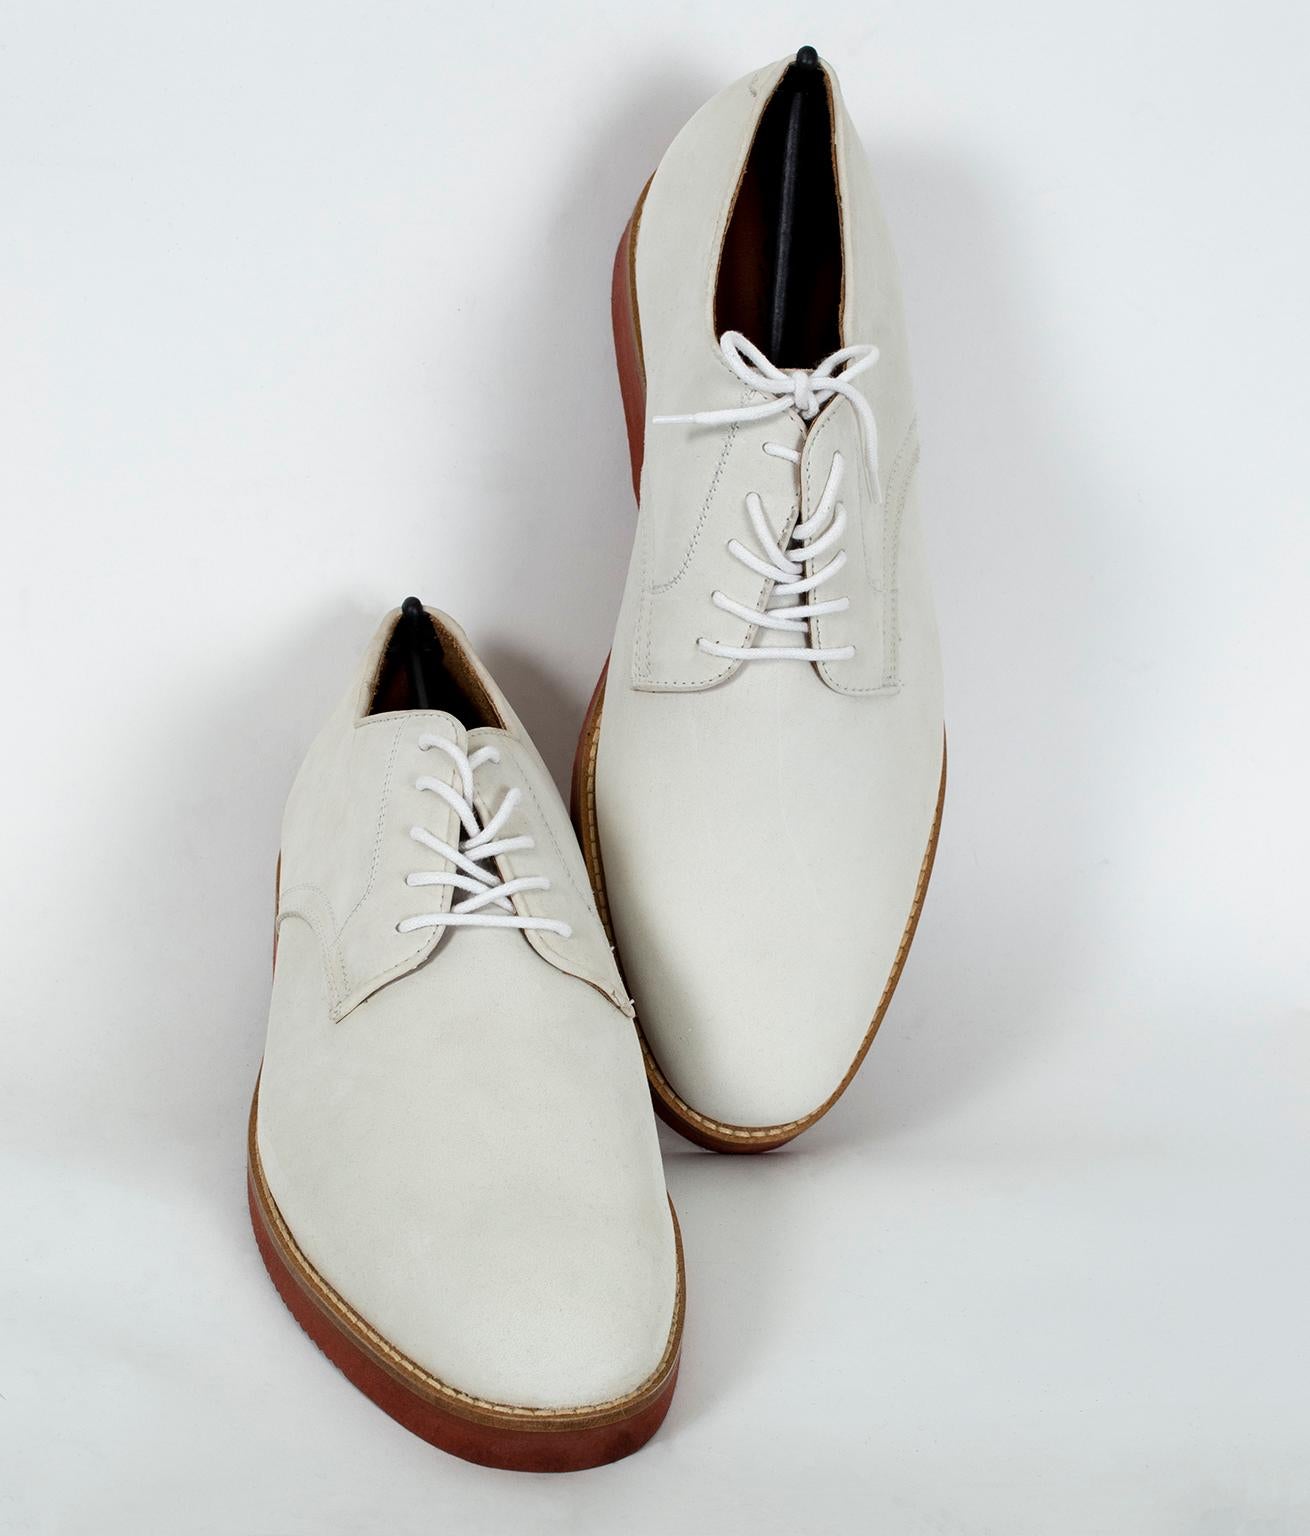 The gold standard of Prep School style, the winter white nubuck brogue is the footwear equivalent of a navy blazer with gold buttons: no matter the occasion or season, you simply can't miss. And nothing beats a brand new pair in a hard-to-find large